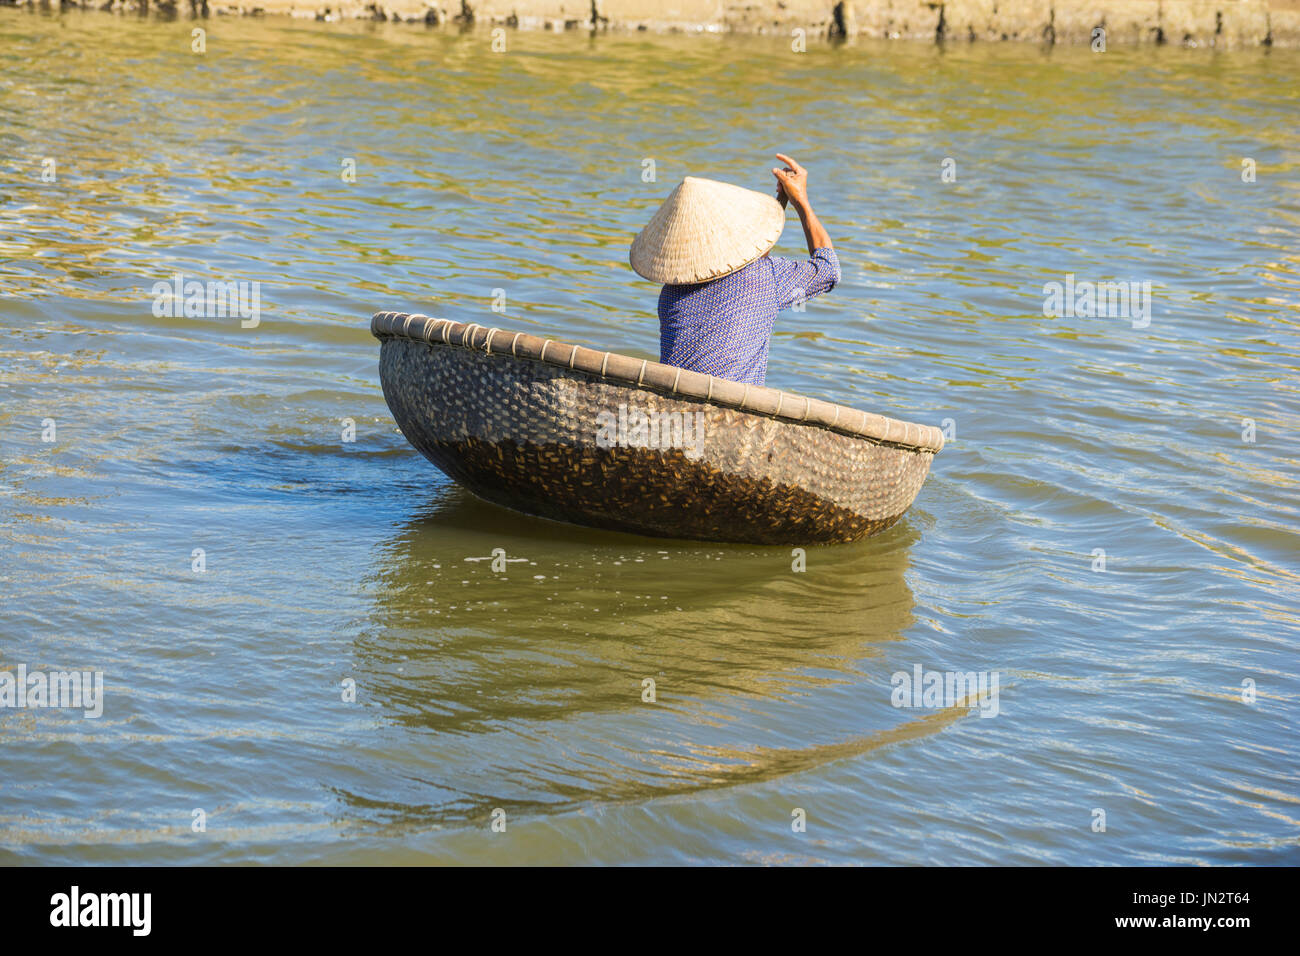 Vietnamese woman padding traditional round woven bamboo boat across river Stock Photo